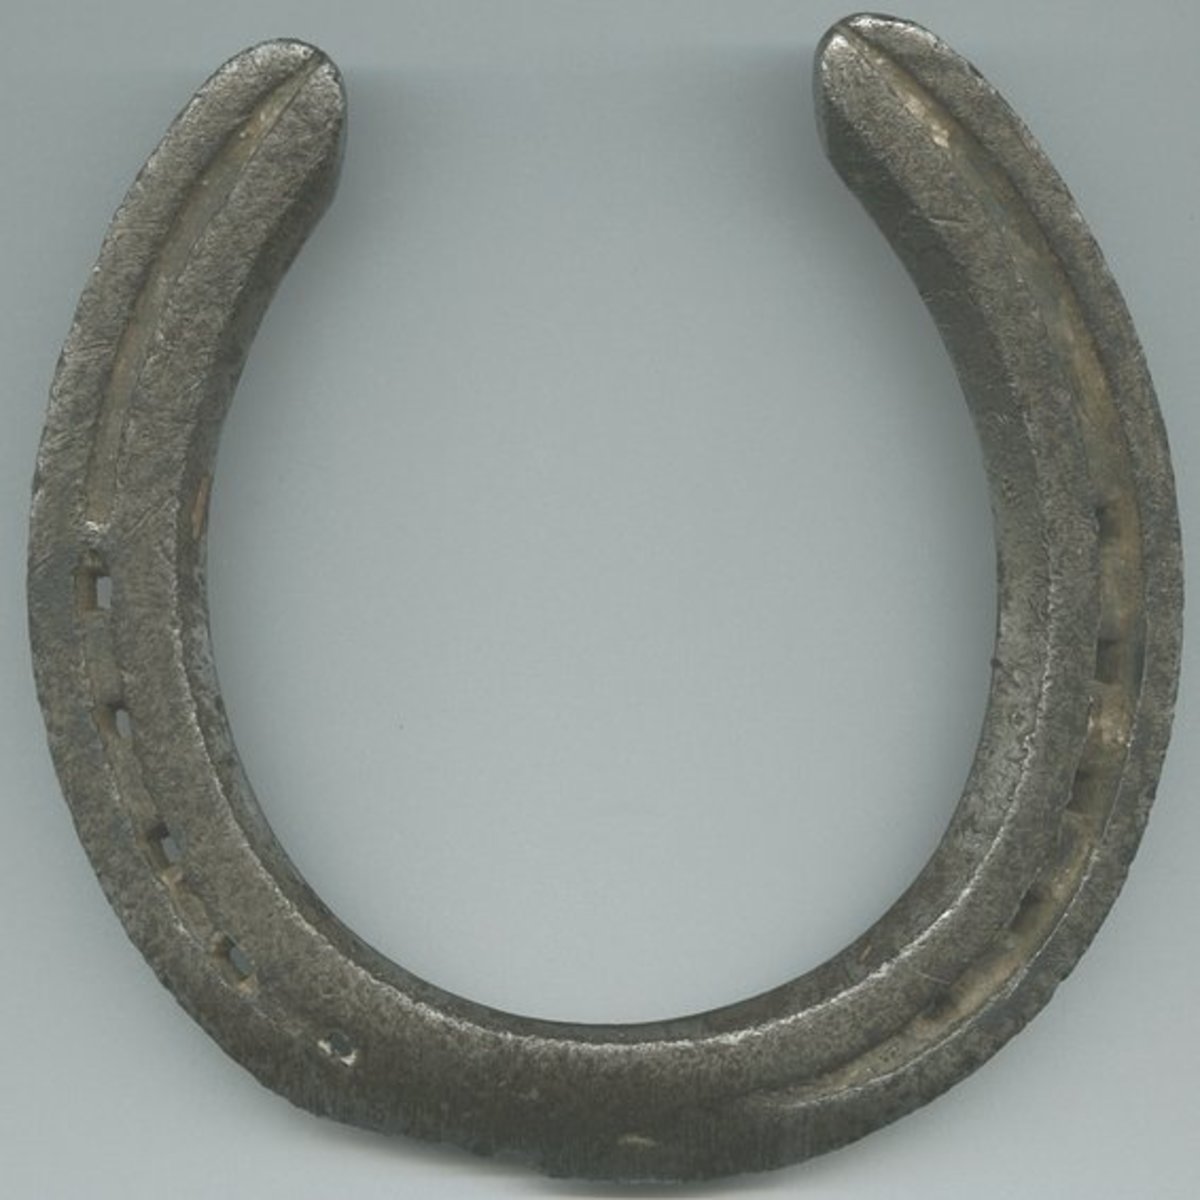 A horseshoe with the ends pointing up (as shown here) is good luck; the ends pointing down is bad luck.